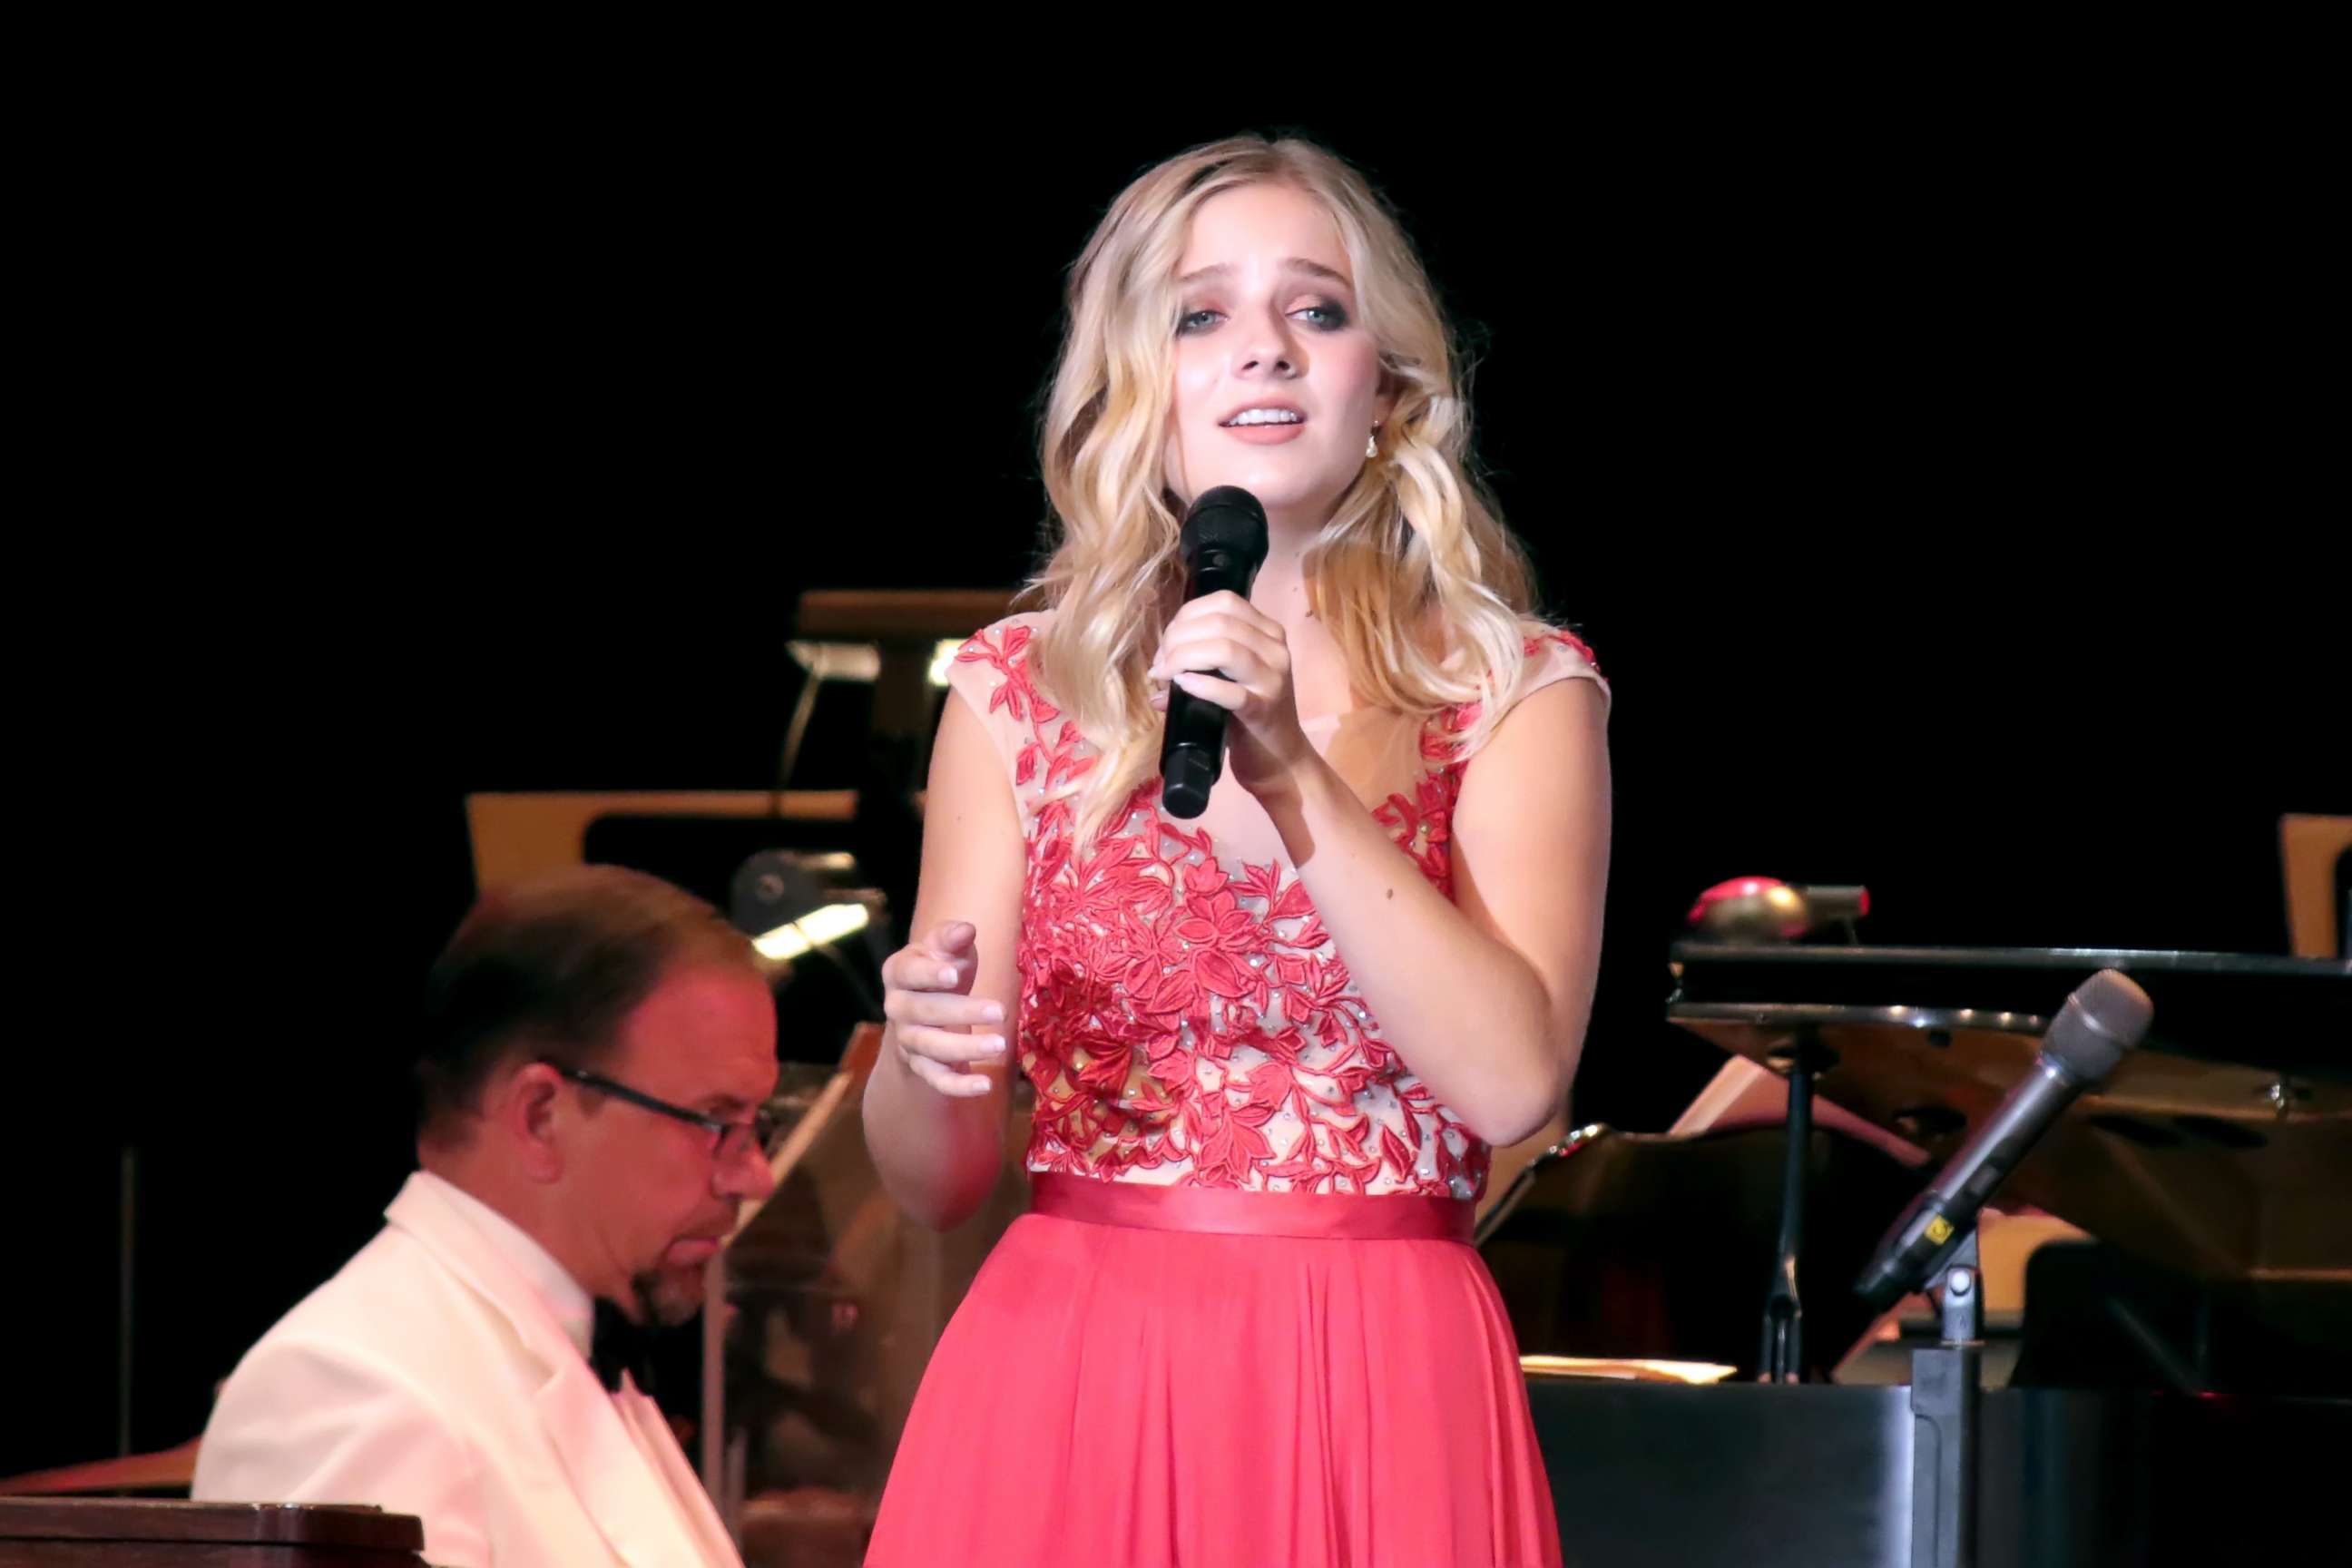 PHOTO: Jackie Evancho performs her classical and crossover musical selections at the Ocean City Music Pier, July 29, 2018, in Ocean City, New Jersey.